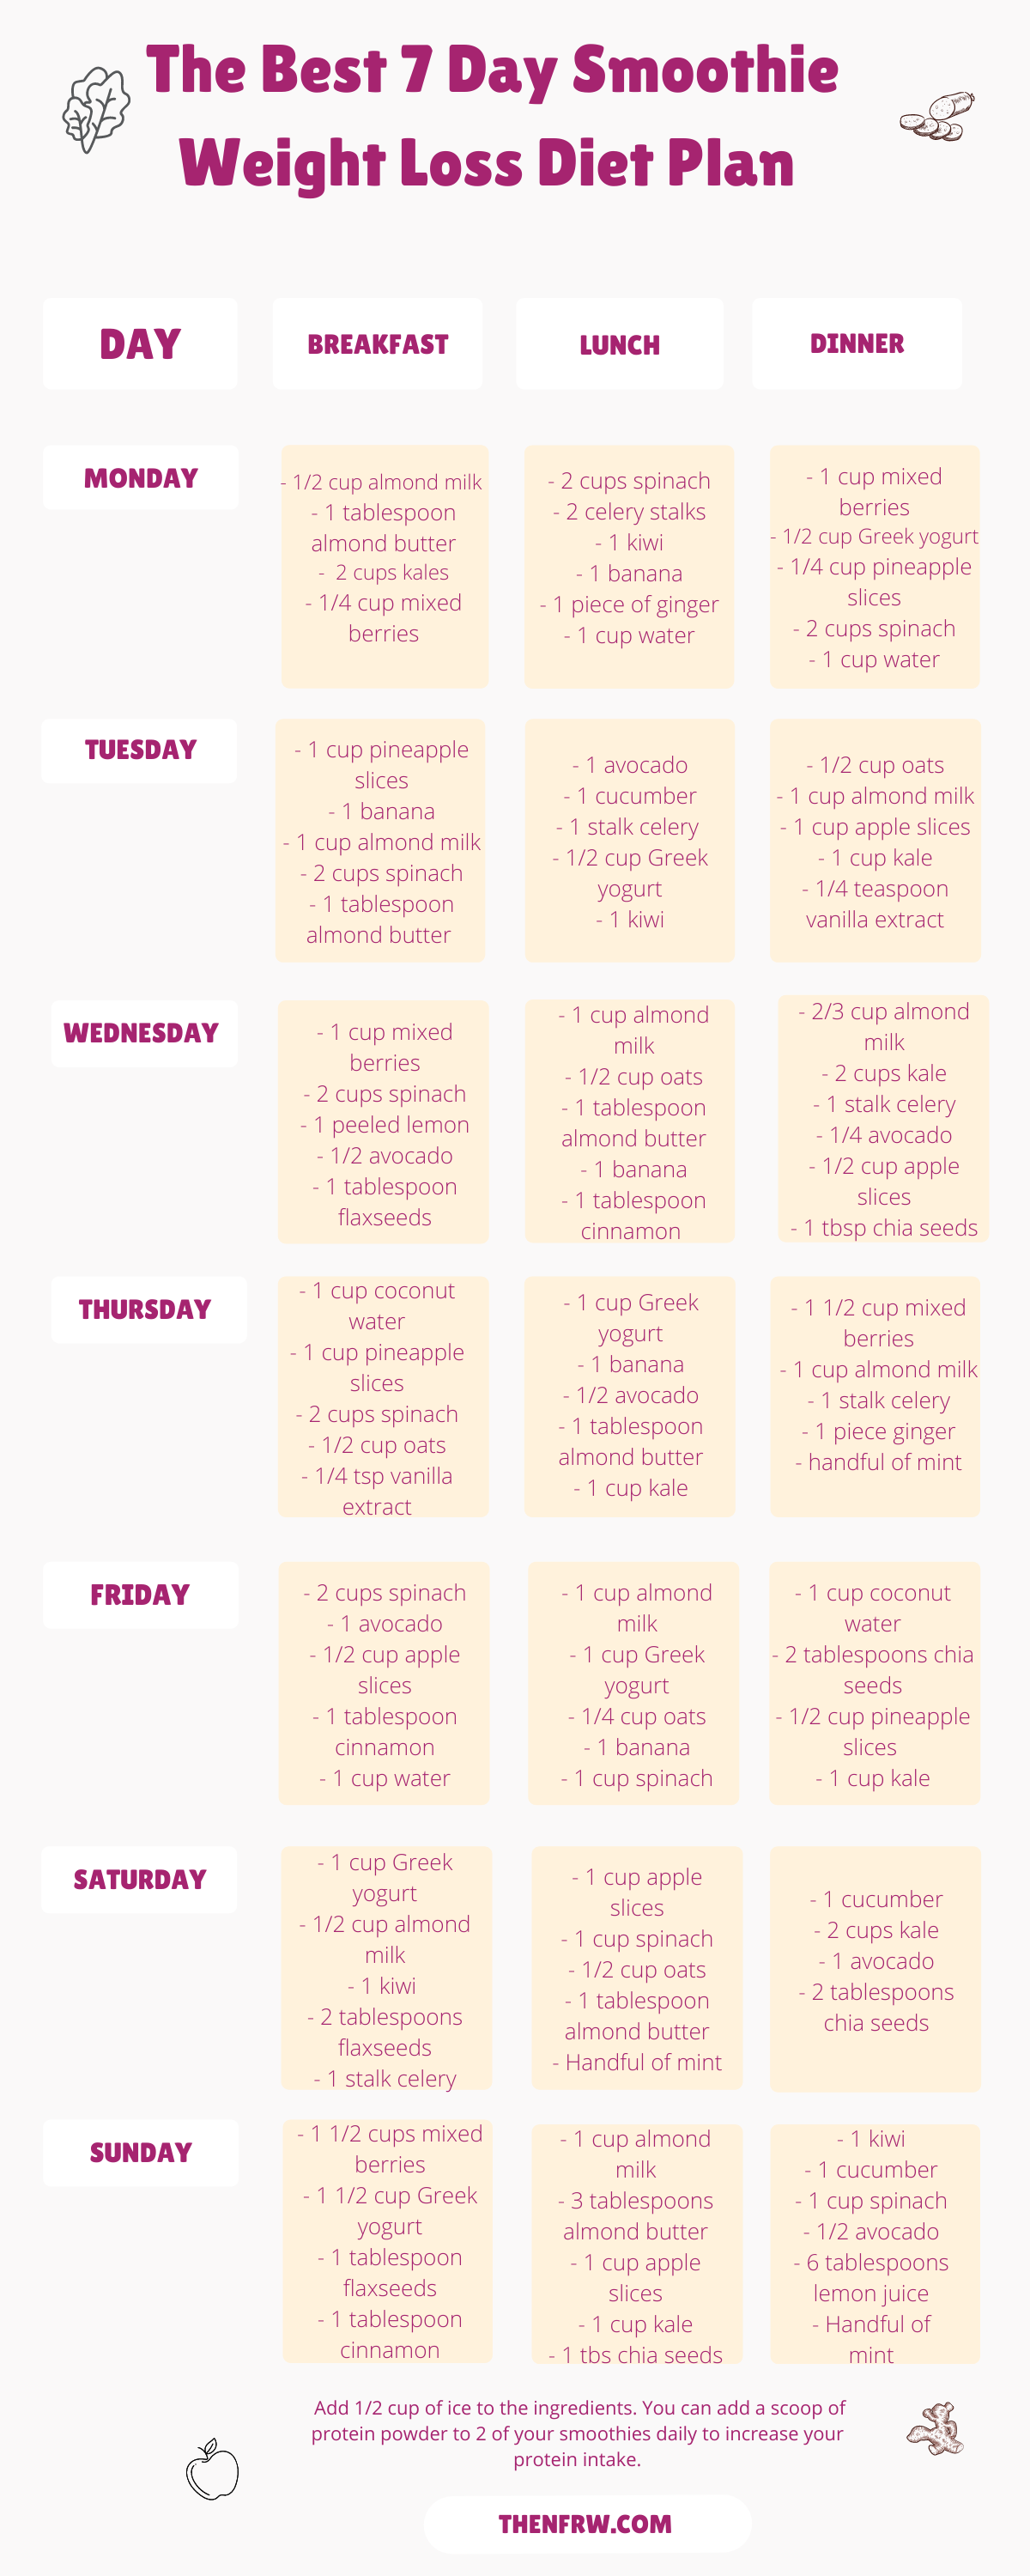 7-Day Smoothie Weight Loss Diet Plan. Thenfrw.com